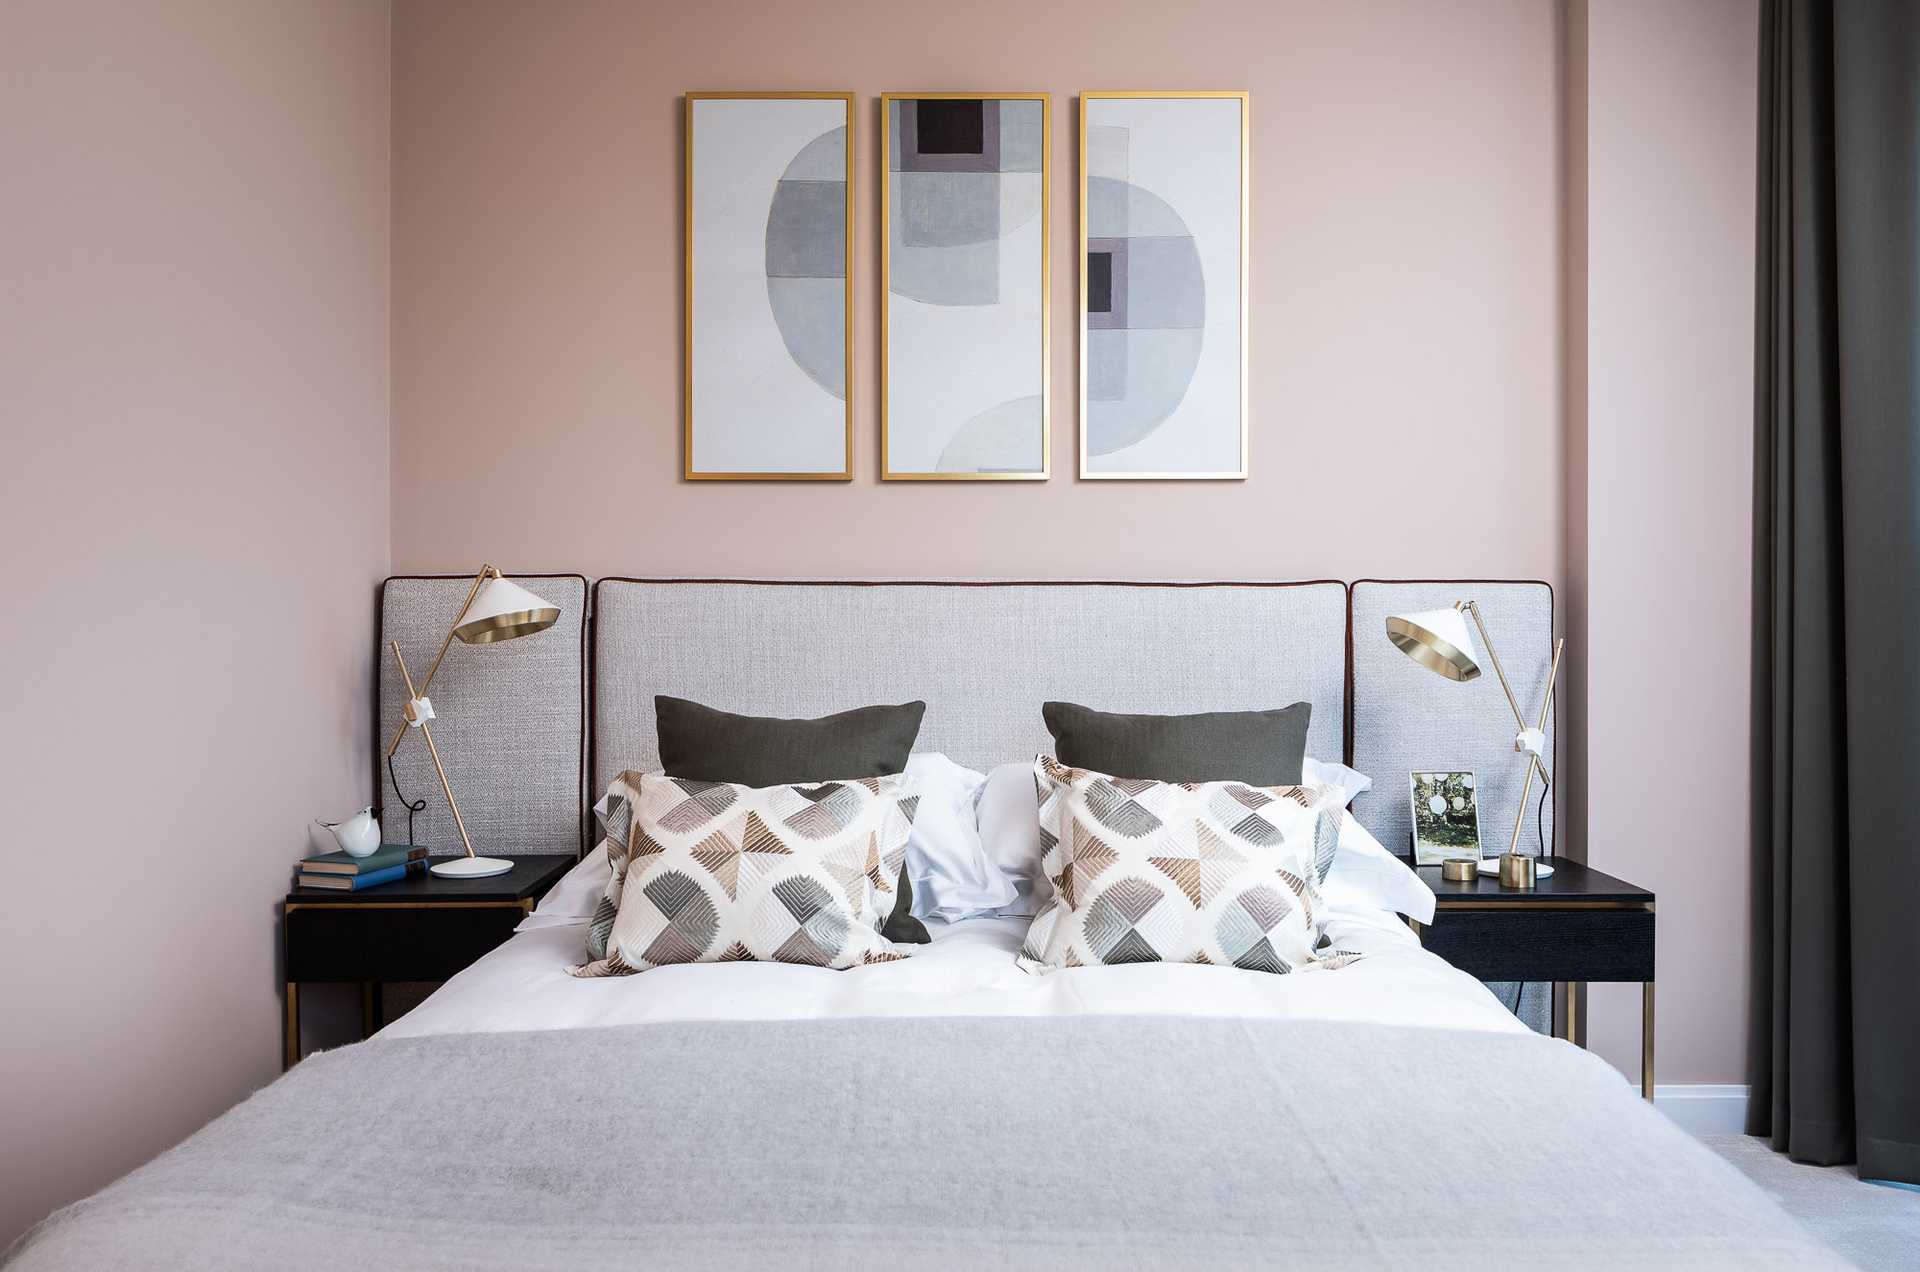 Pink bedroom with abstract art and Bert Frank table lamps. Zimmer & Rhode cushion fabric